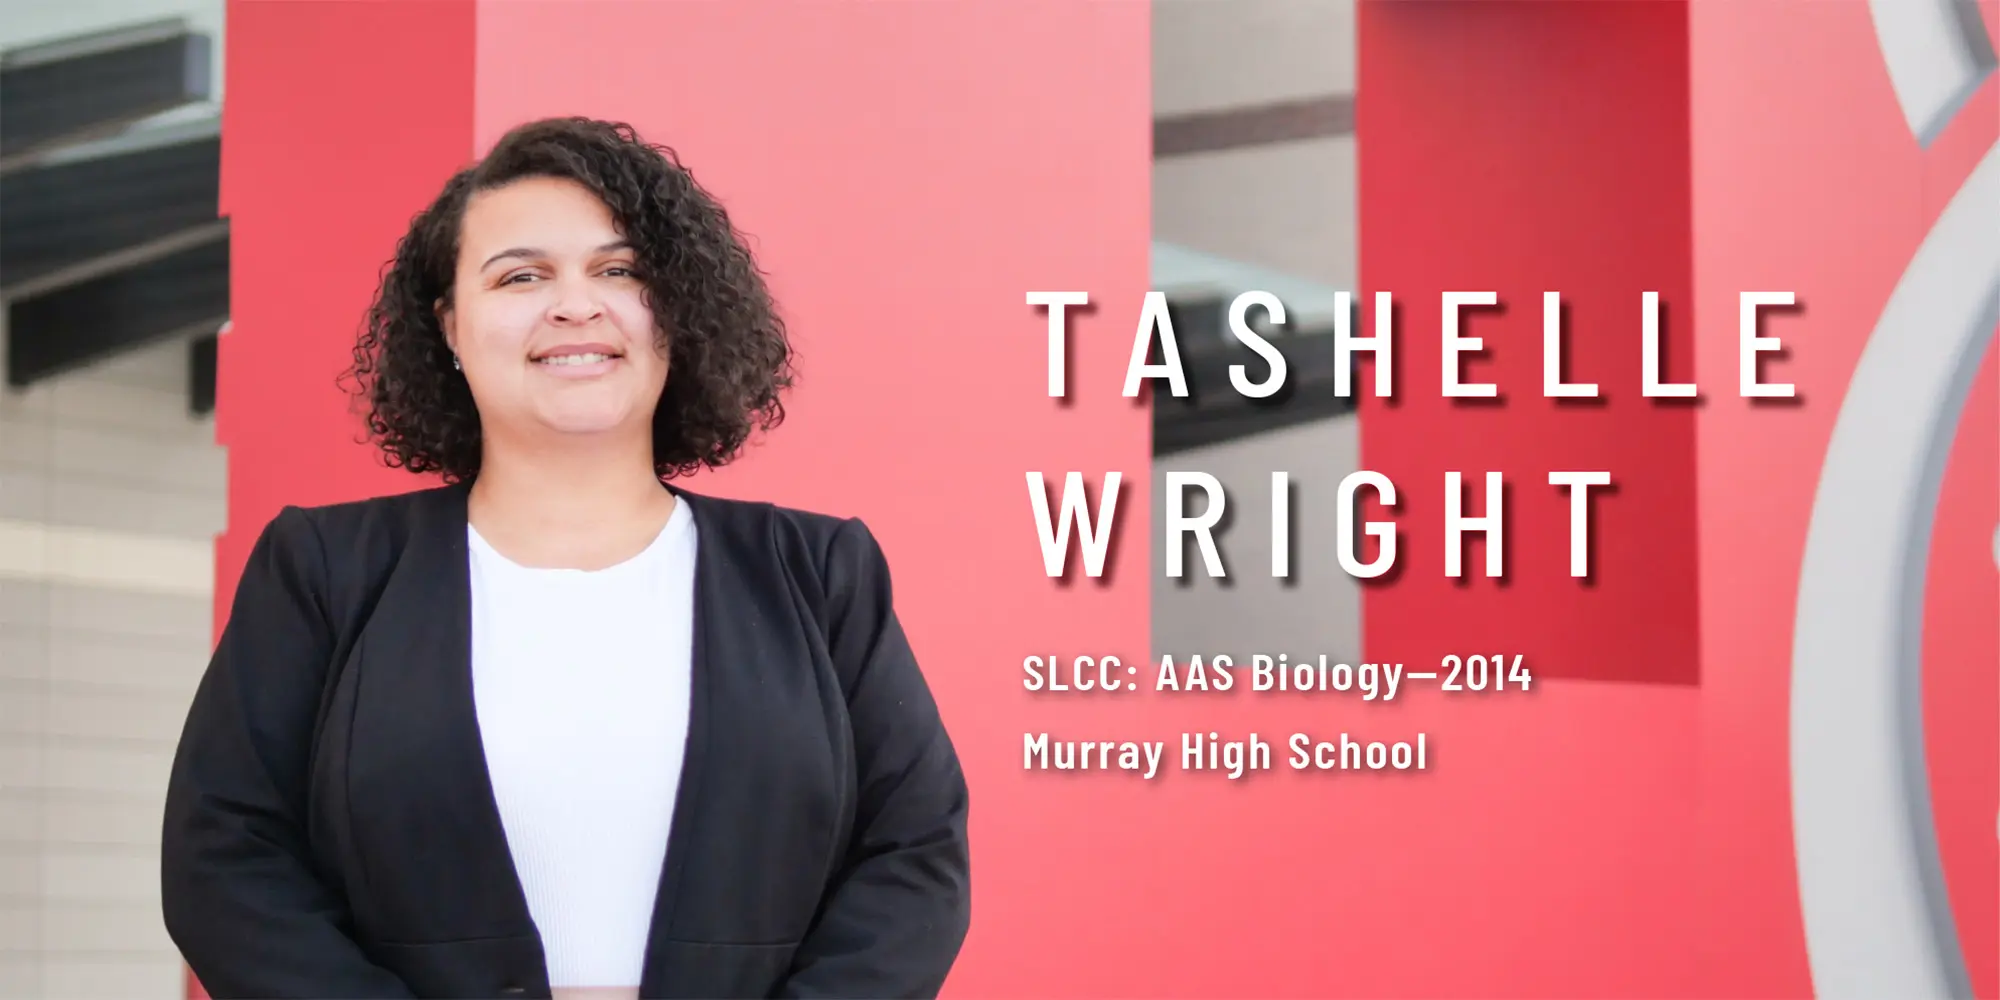 Tashelle Wright, SLCC AAS Biology in 2014, From Murray High School